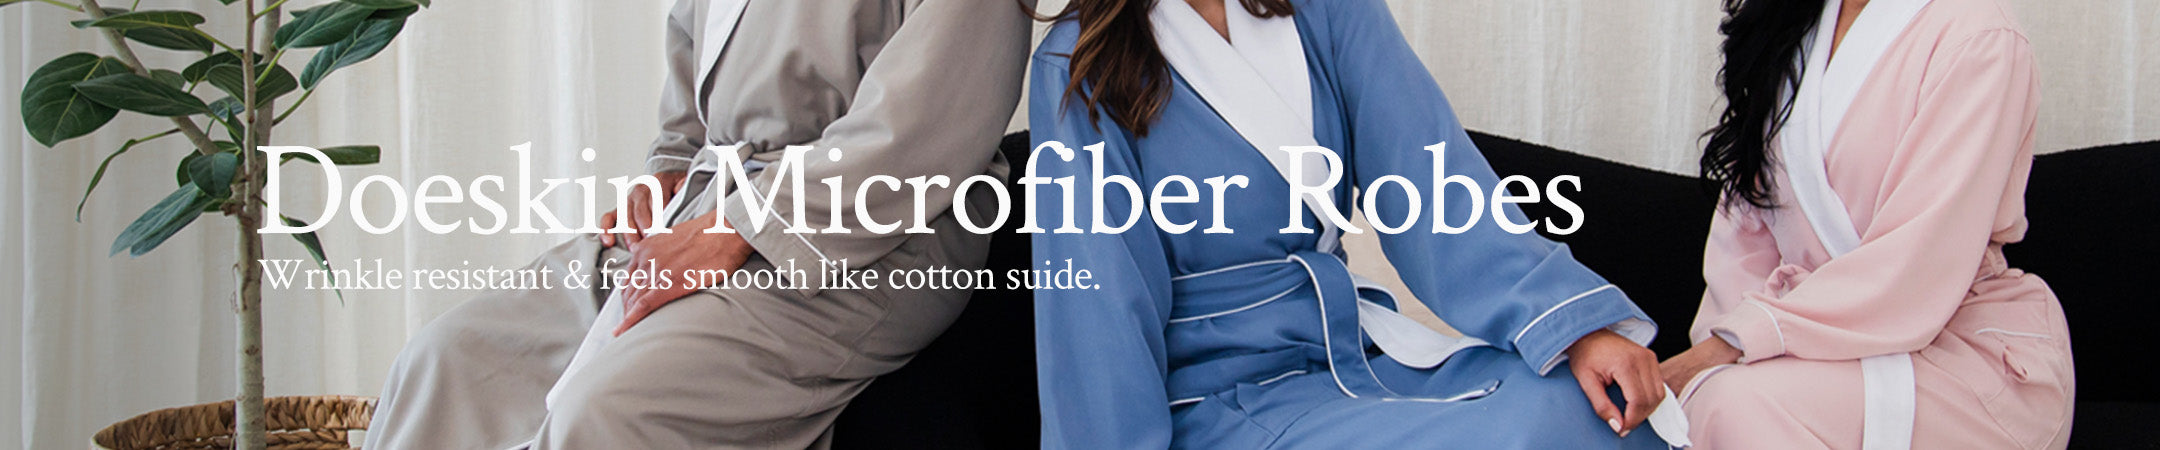 Collection / Doeskin Microfiber Robes